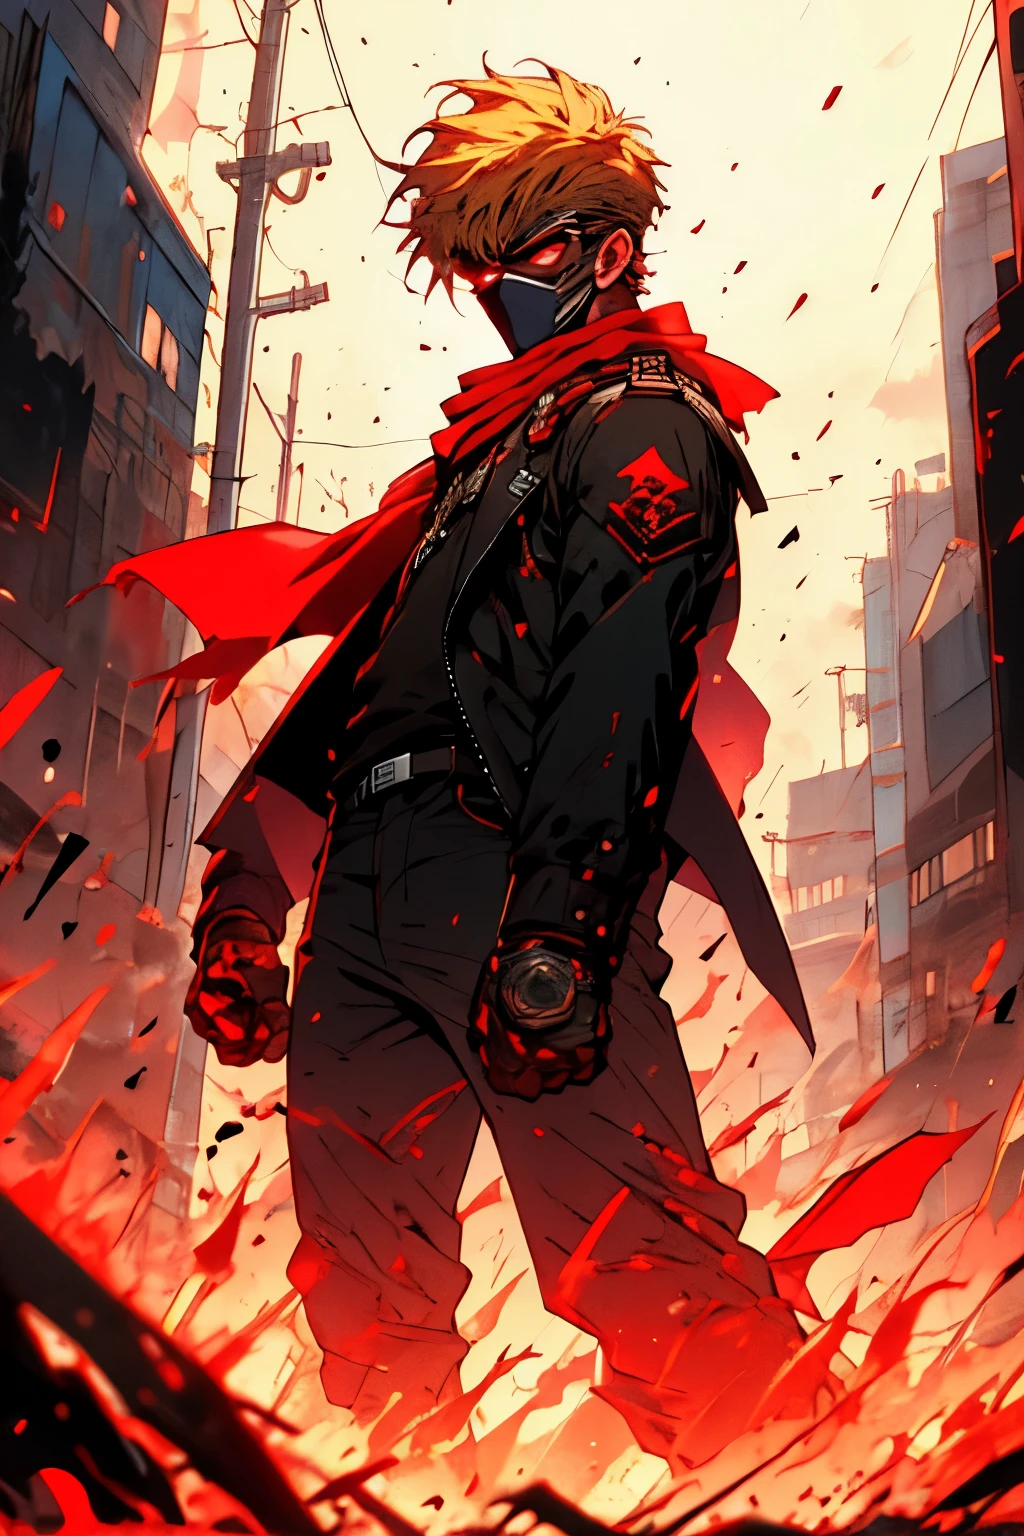 skinny tall man with a red bandana with short buzzcut
 blonde hairstyle and Band-Aid on cheek in a red and black jacket with black
 face mask on shoulders and up perspective looking down into a apocalypses city